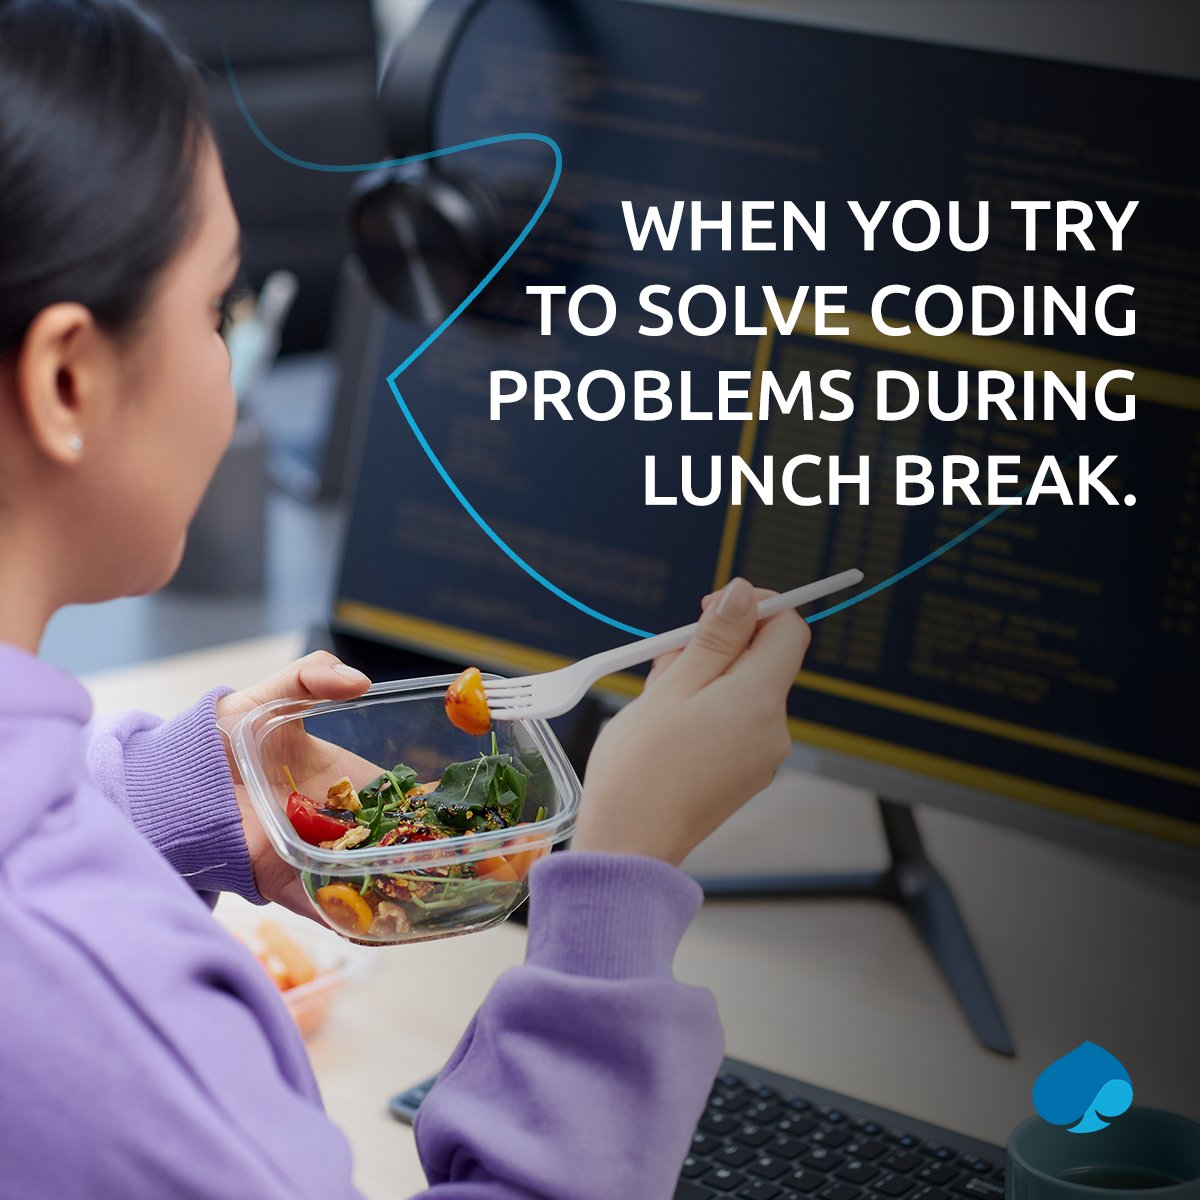 When your hunger for food competes with your hunger for coding challenges. 
#MondayMotivation